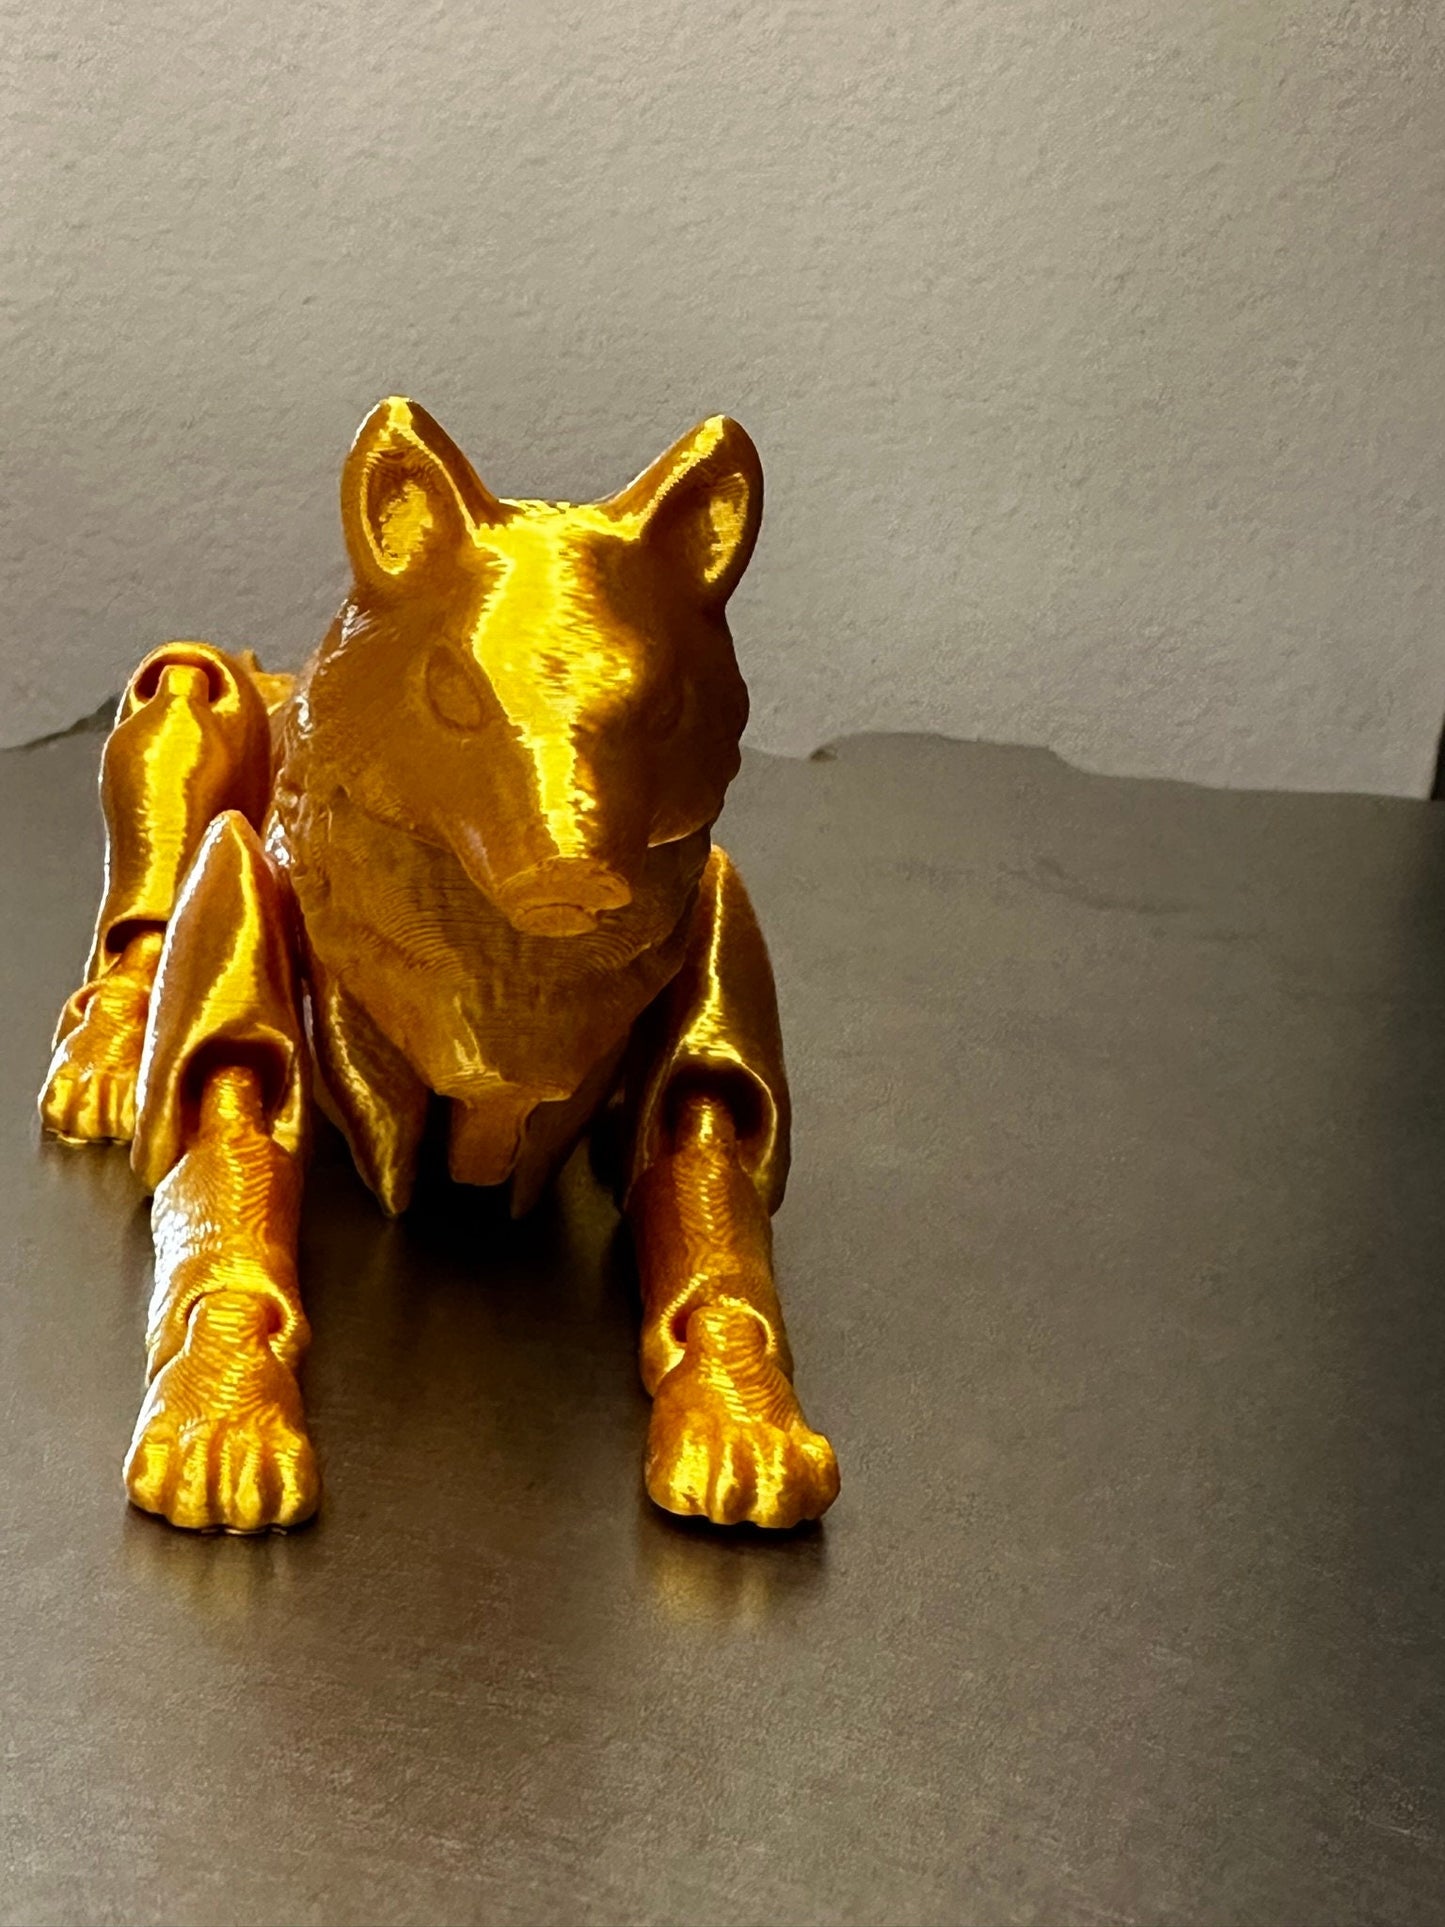 Articulated 3D printed wolf, fidget toy, desk toy, flexi animal